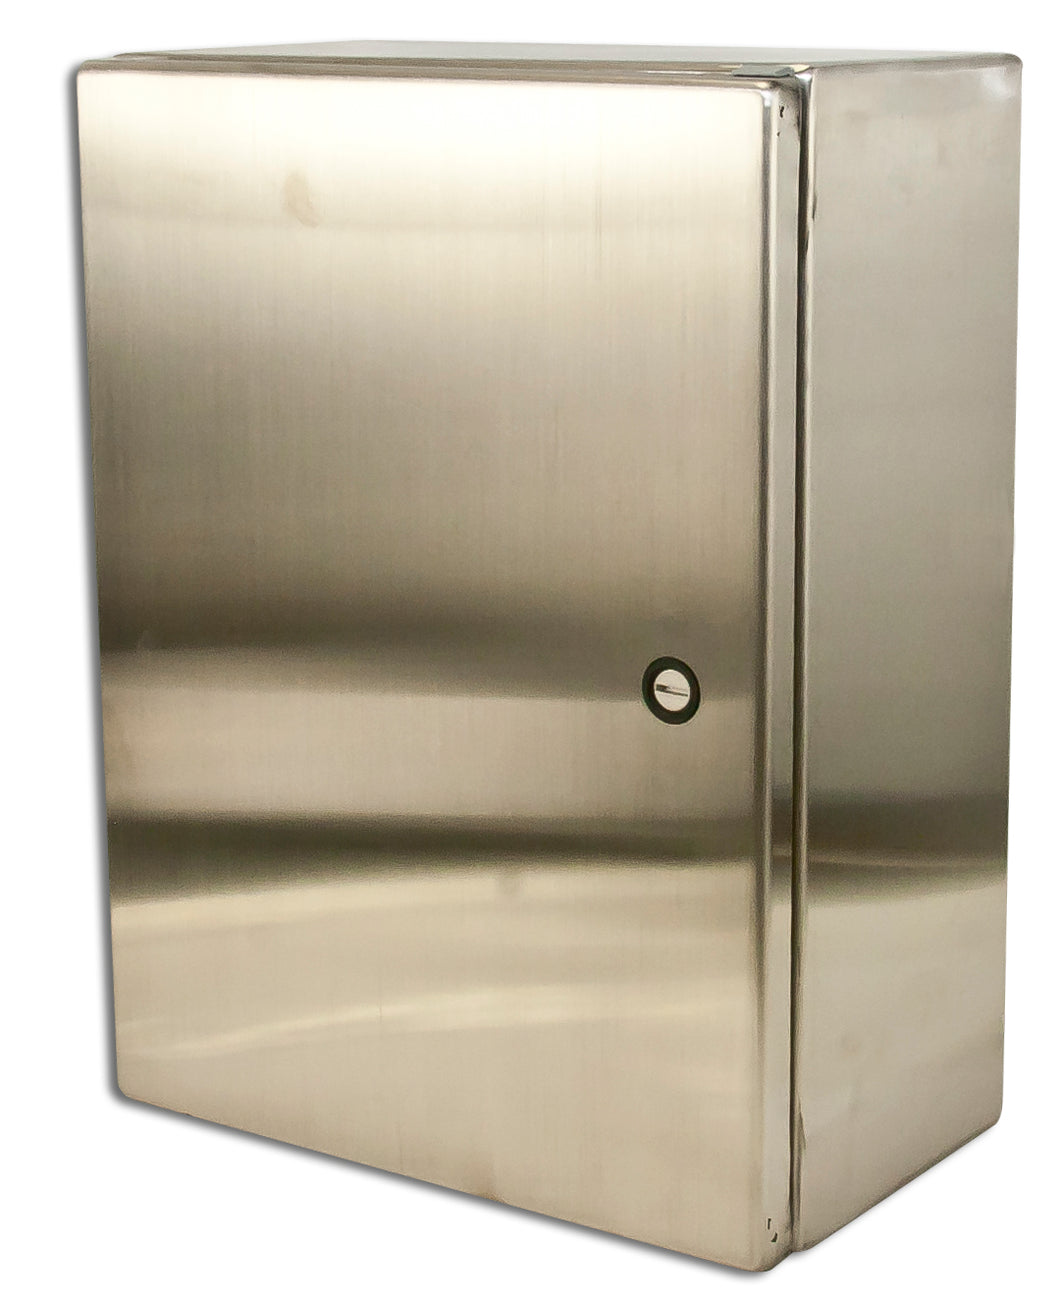 nVent Hoffman CSD30248SS Enclosure, NEMA 4X, Hinged Cover, Stainless Steel, 30